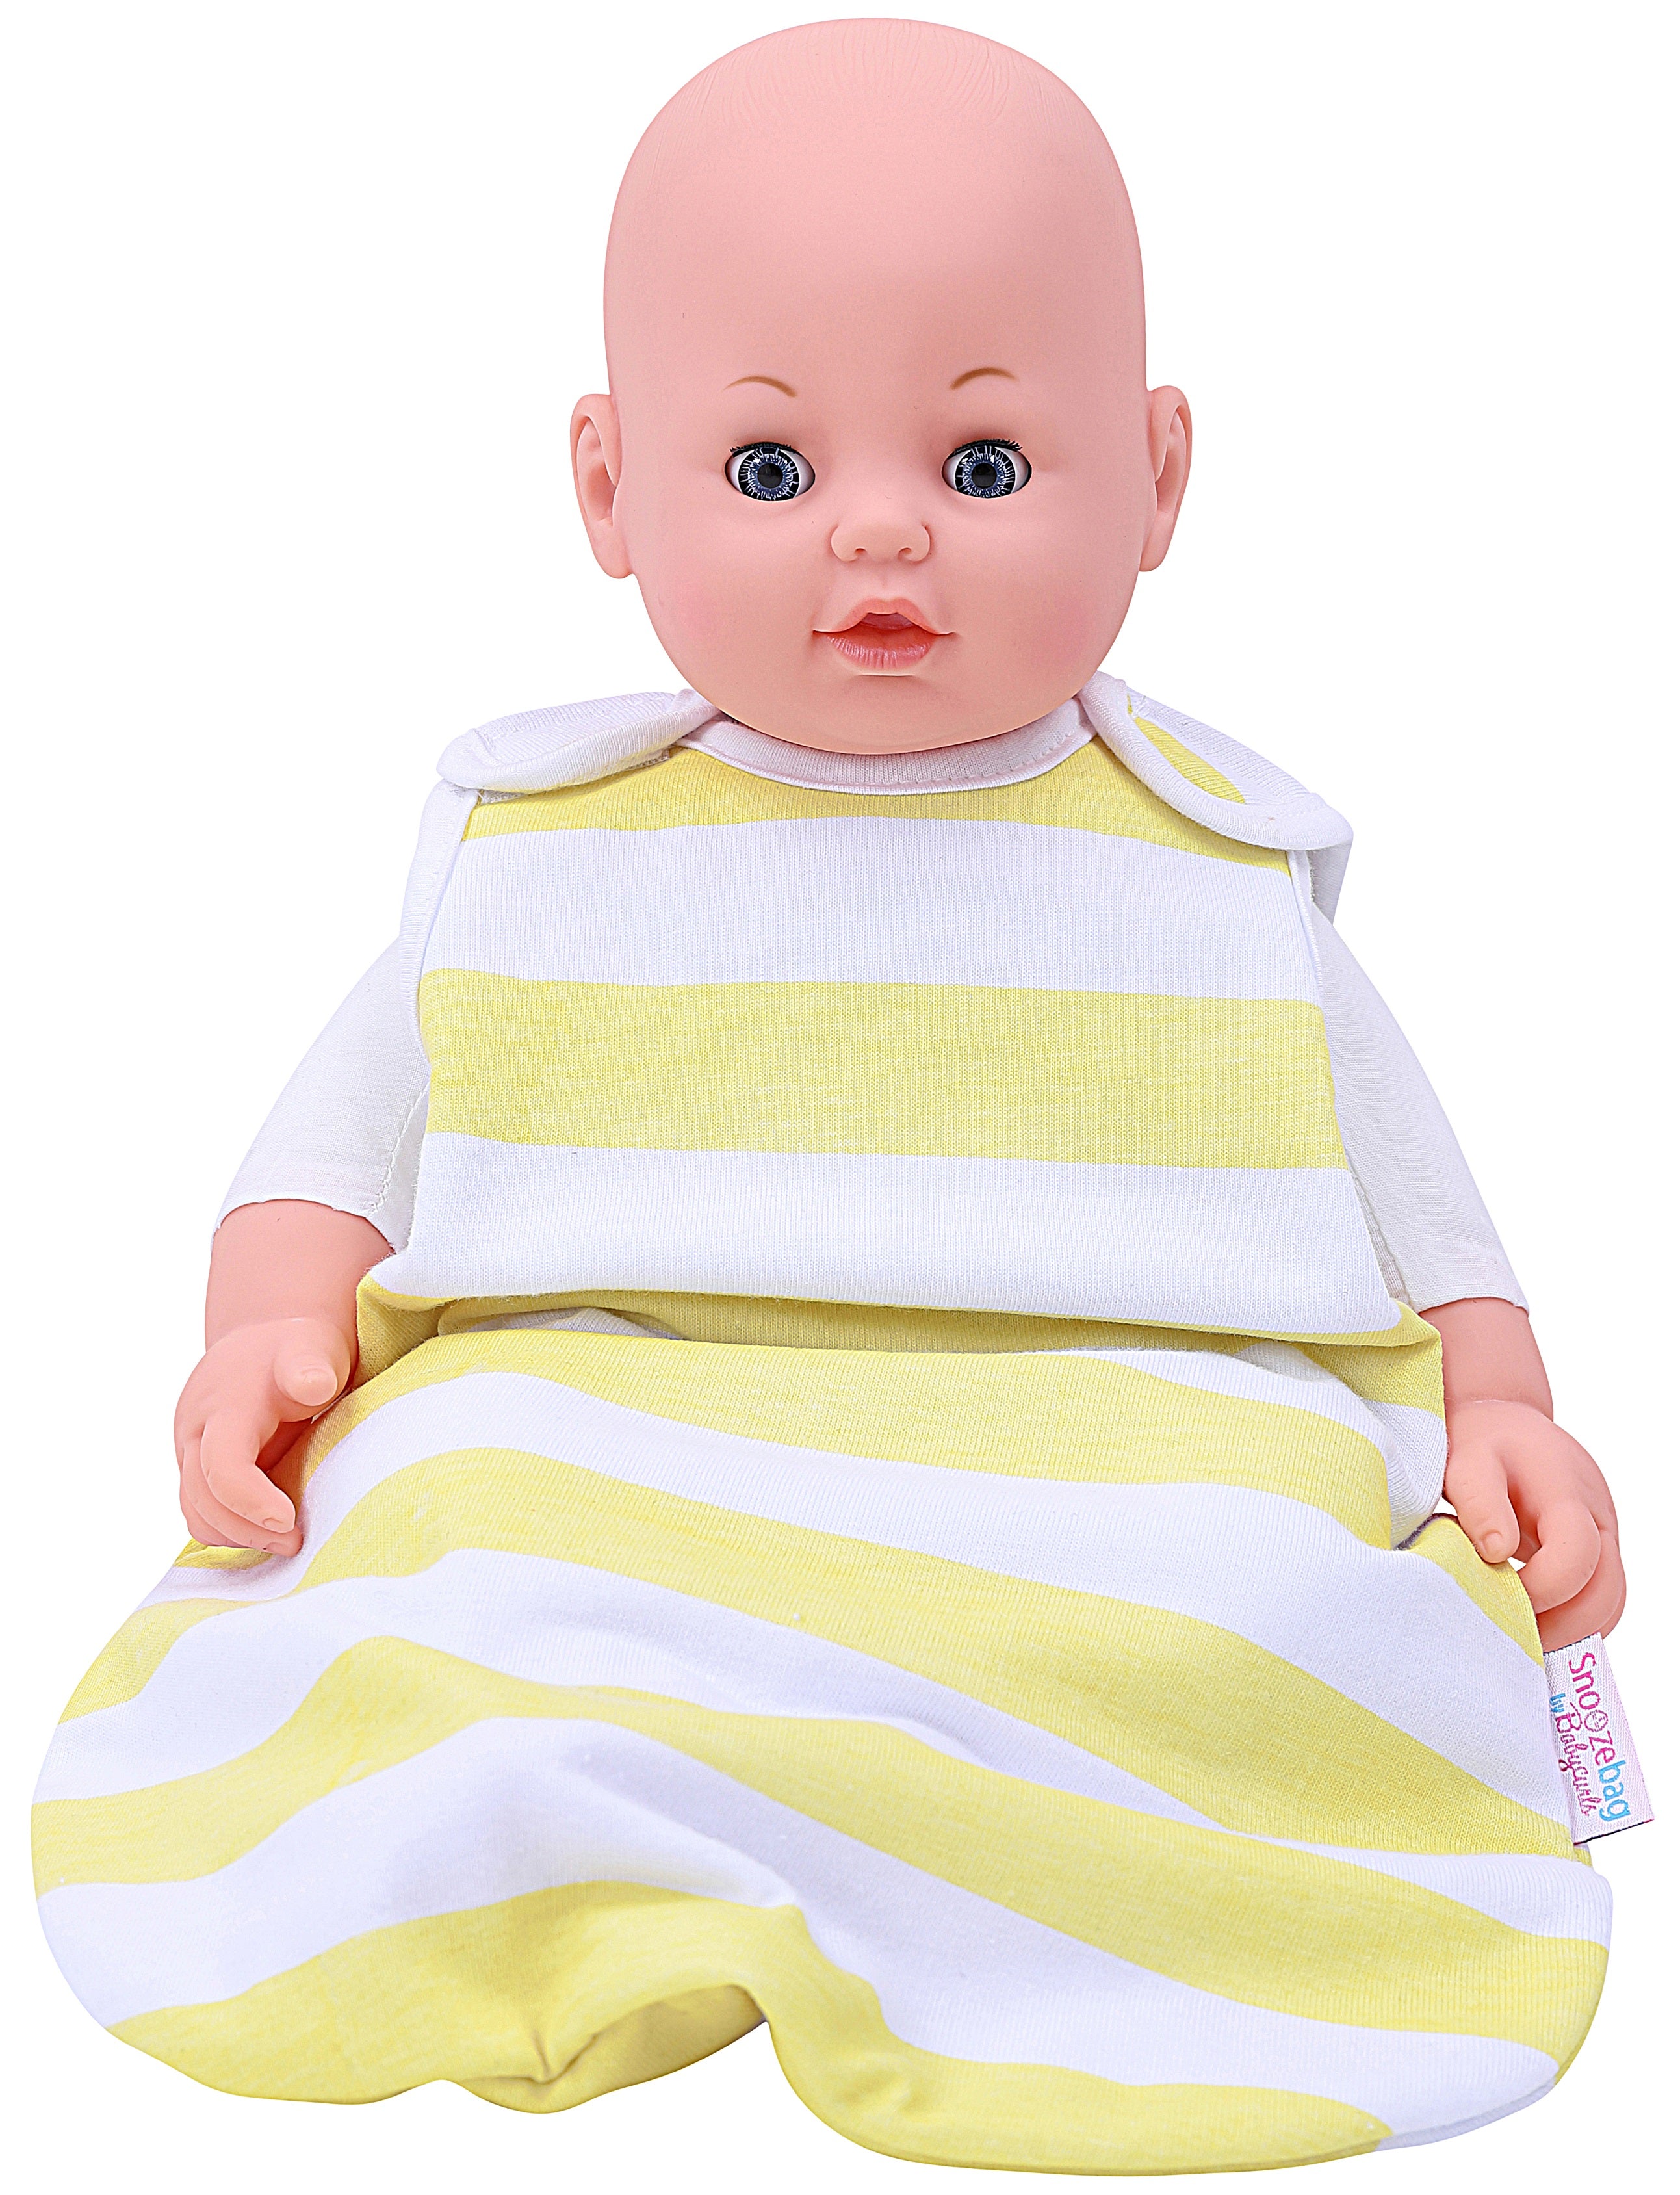 Snoozebag Doll Baby Sleeping Bag Suitable For all Child Toy Dolls Accessory 100% Cotton - Lemon Stripe